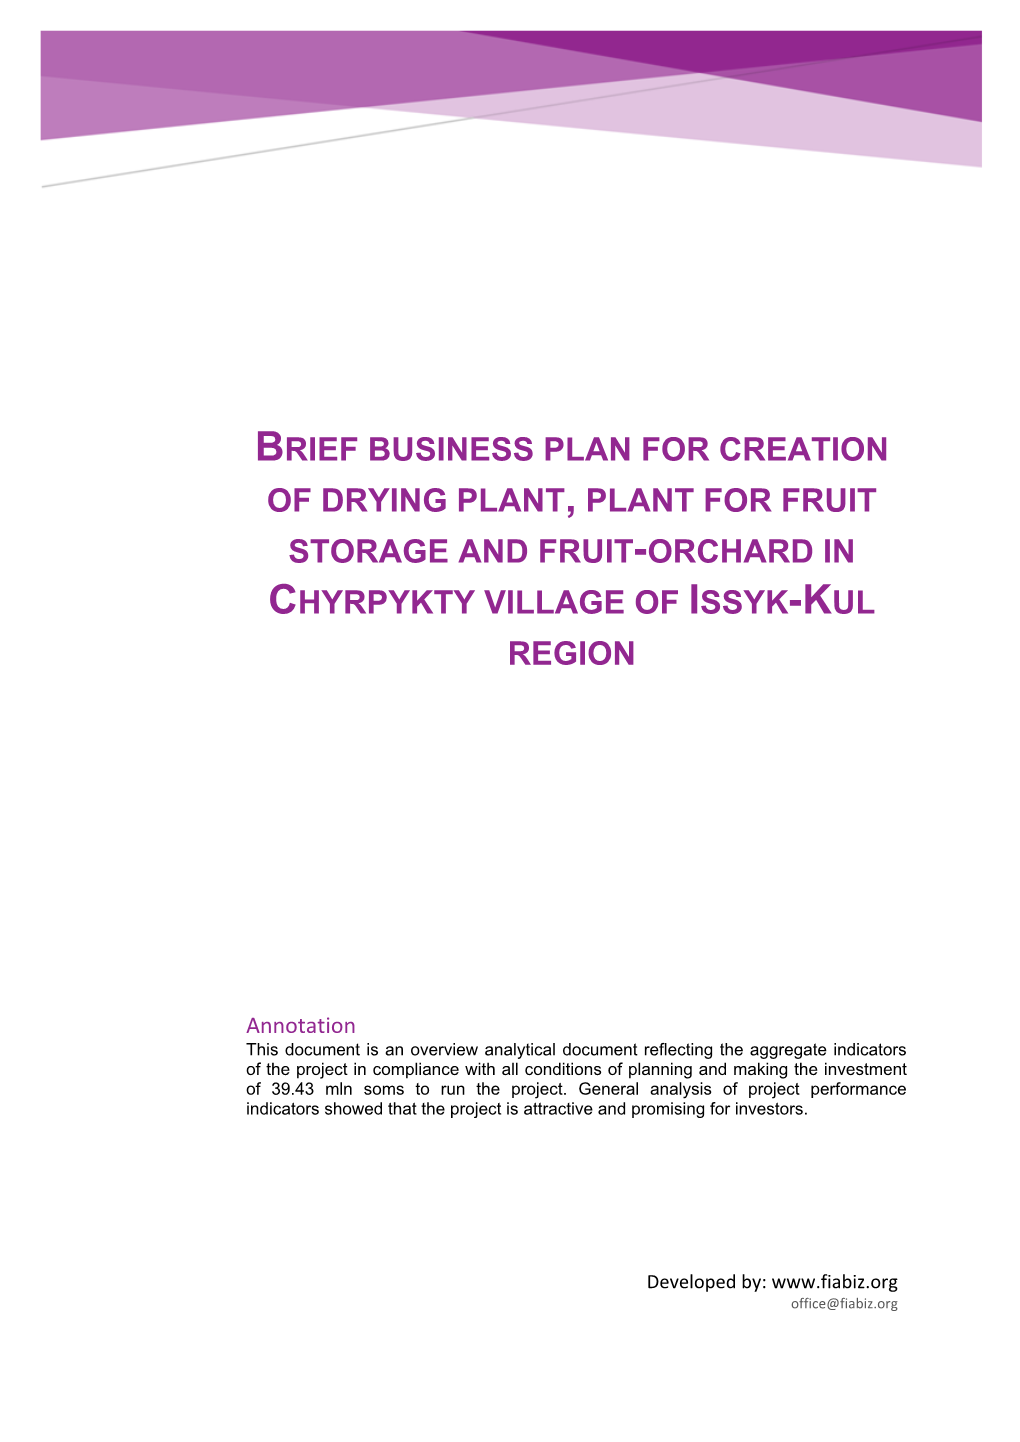 Brief Business Plan for Creation of Drying Plant, Plant for Fruit Storage and Fruit-Orchard in Chyrpykty Village of Issyk-Kul Region